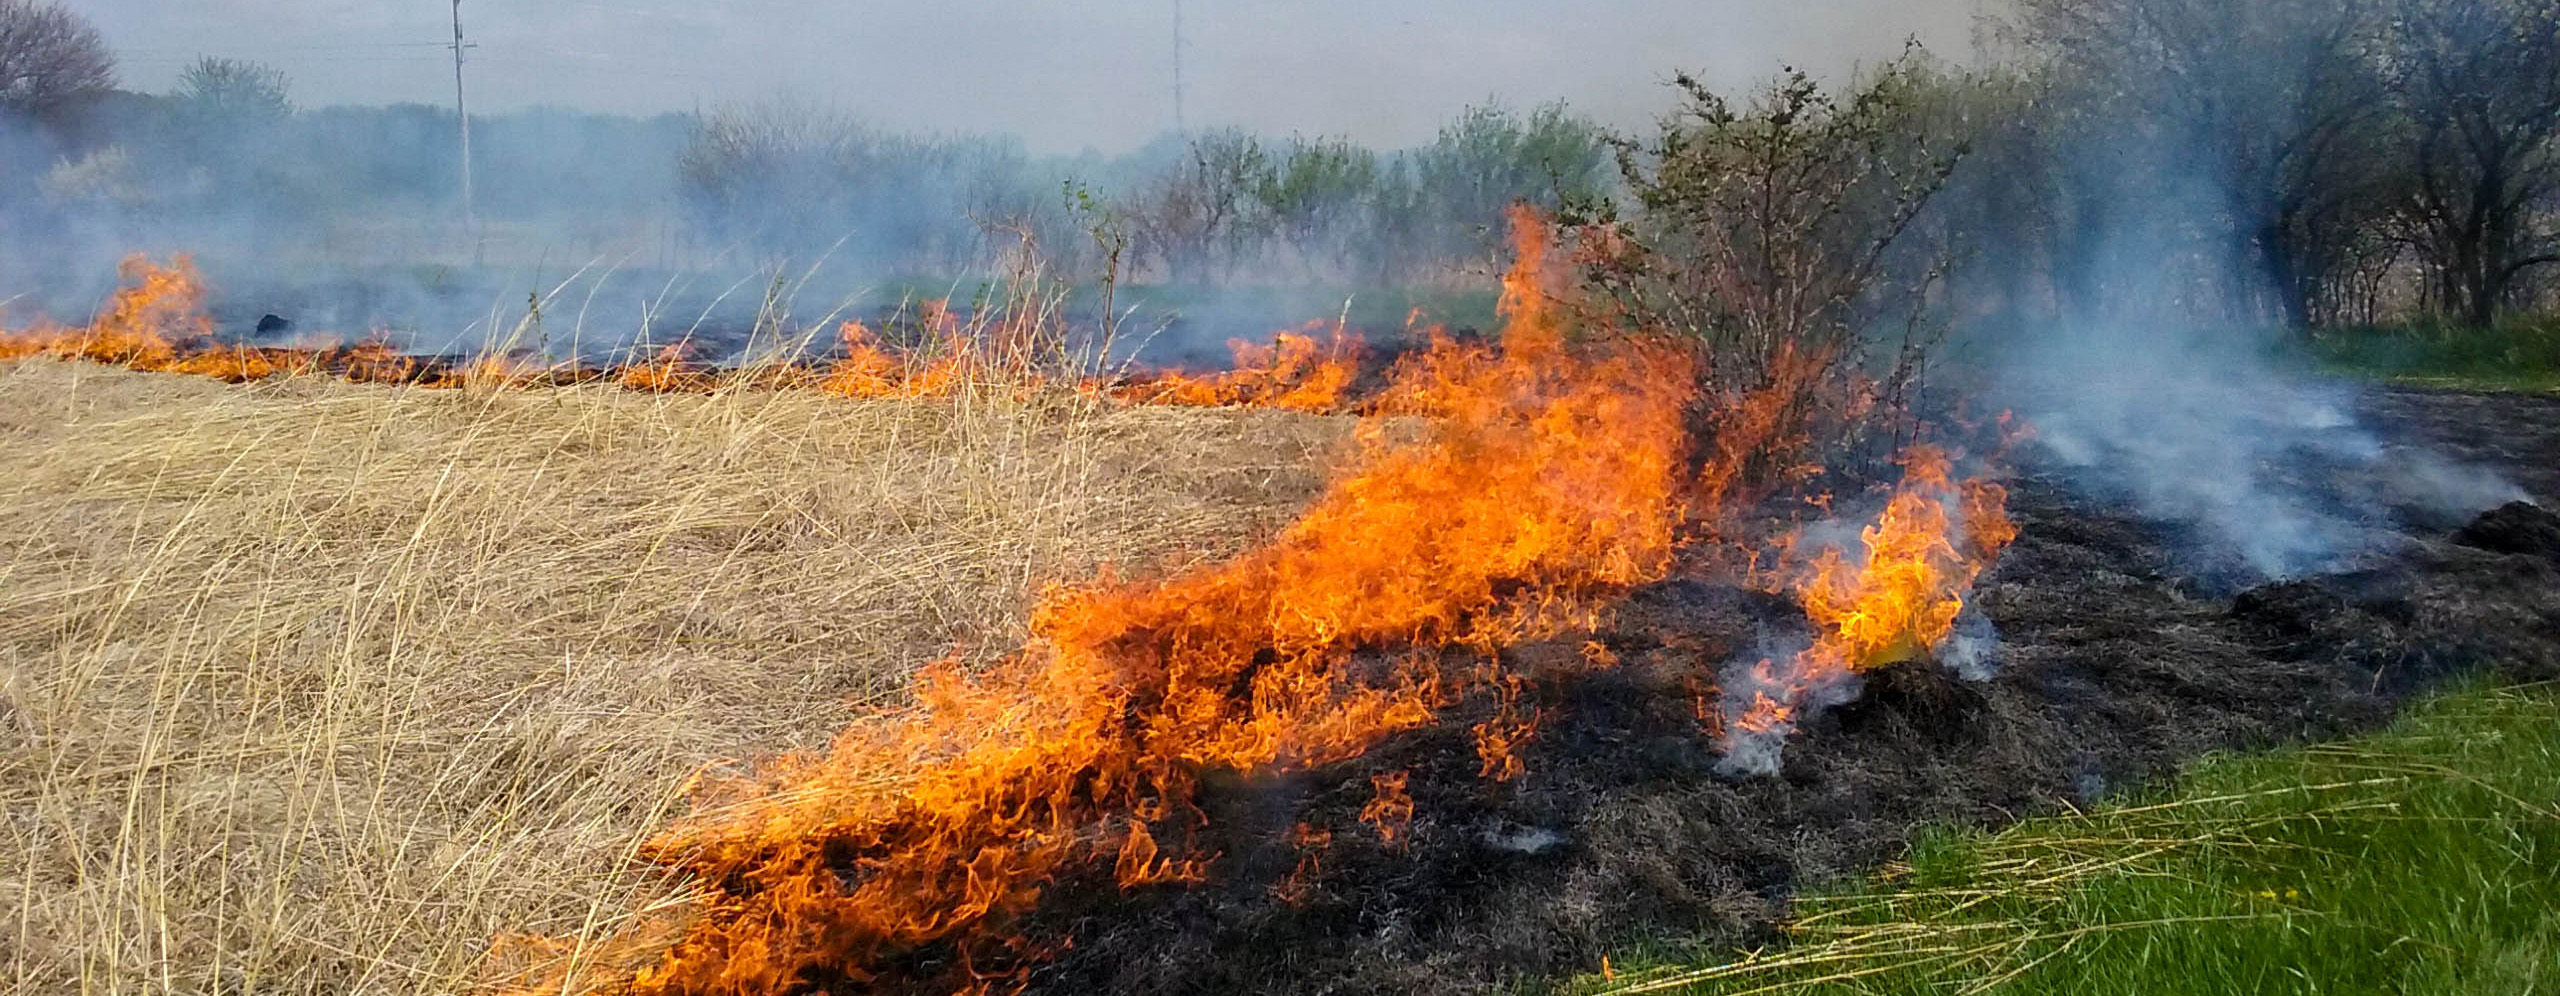 Flames of a prescribed prairie burn around the outside of a field of prairie grass.